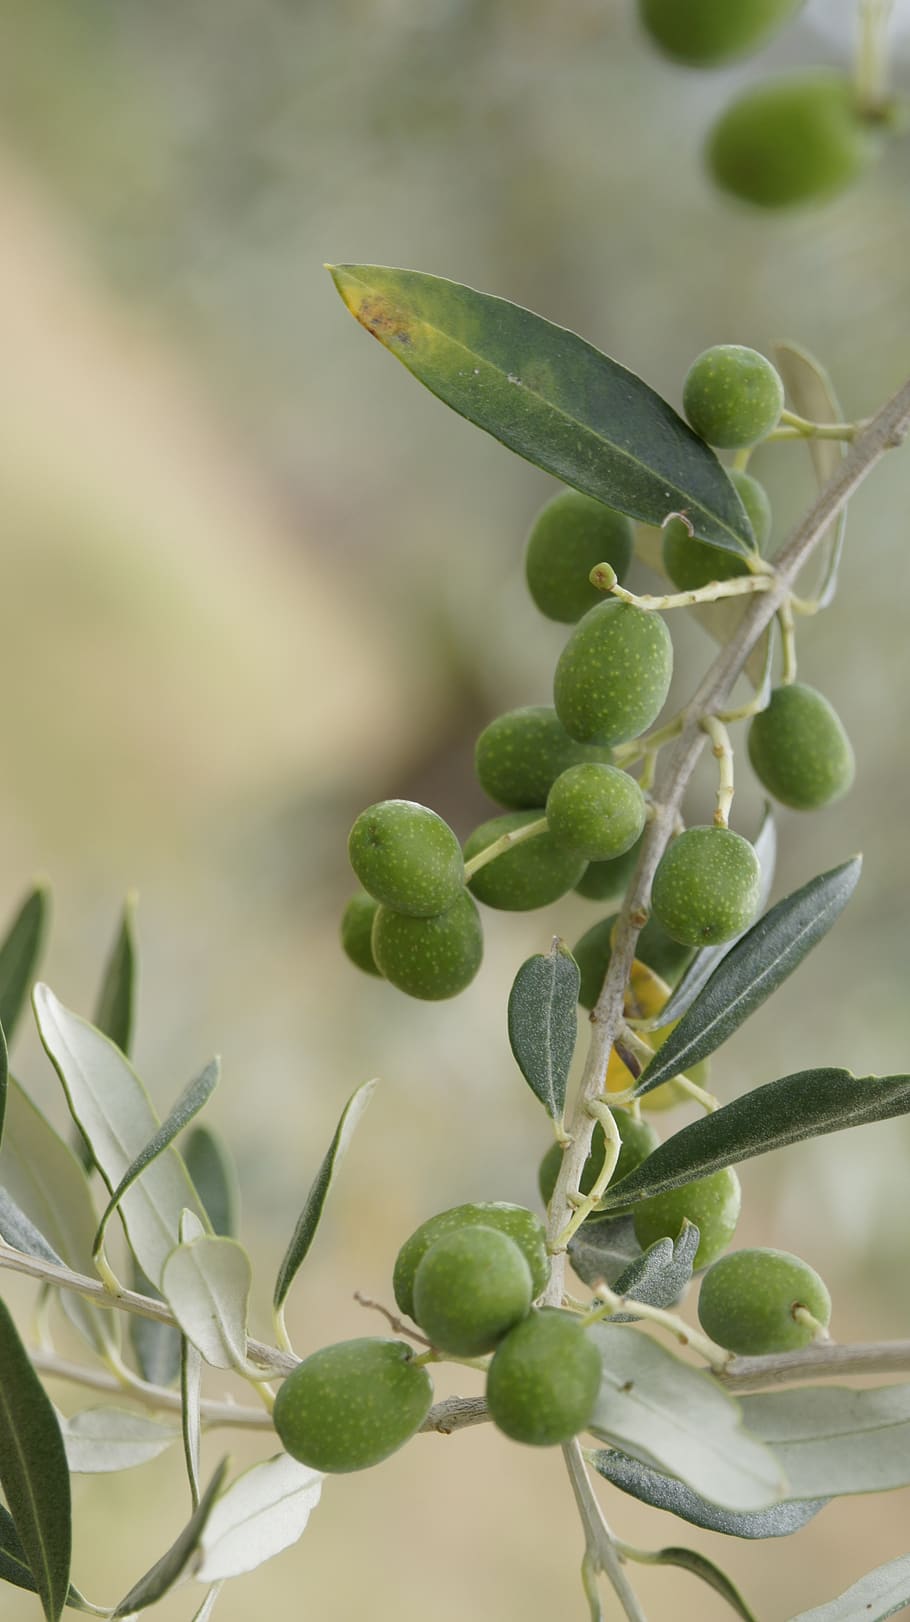 the olives, the olive tree, olive grove, tuscany, italy, growth, plant, leaf, green color, plant part